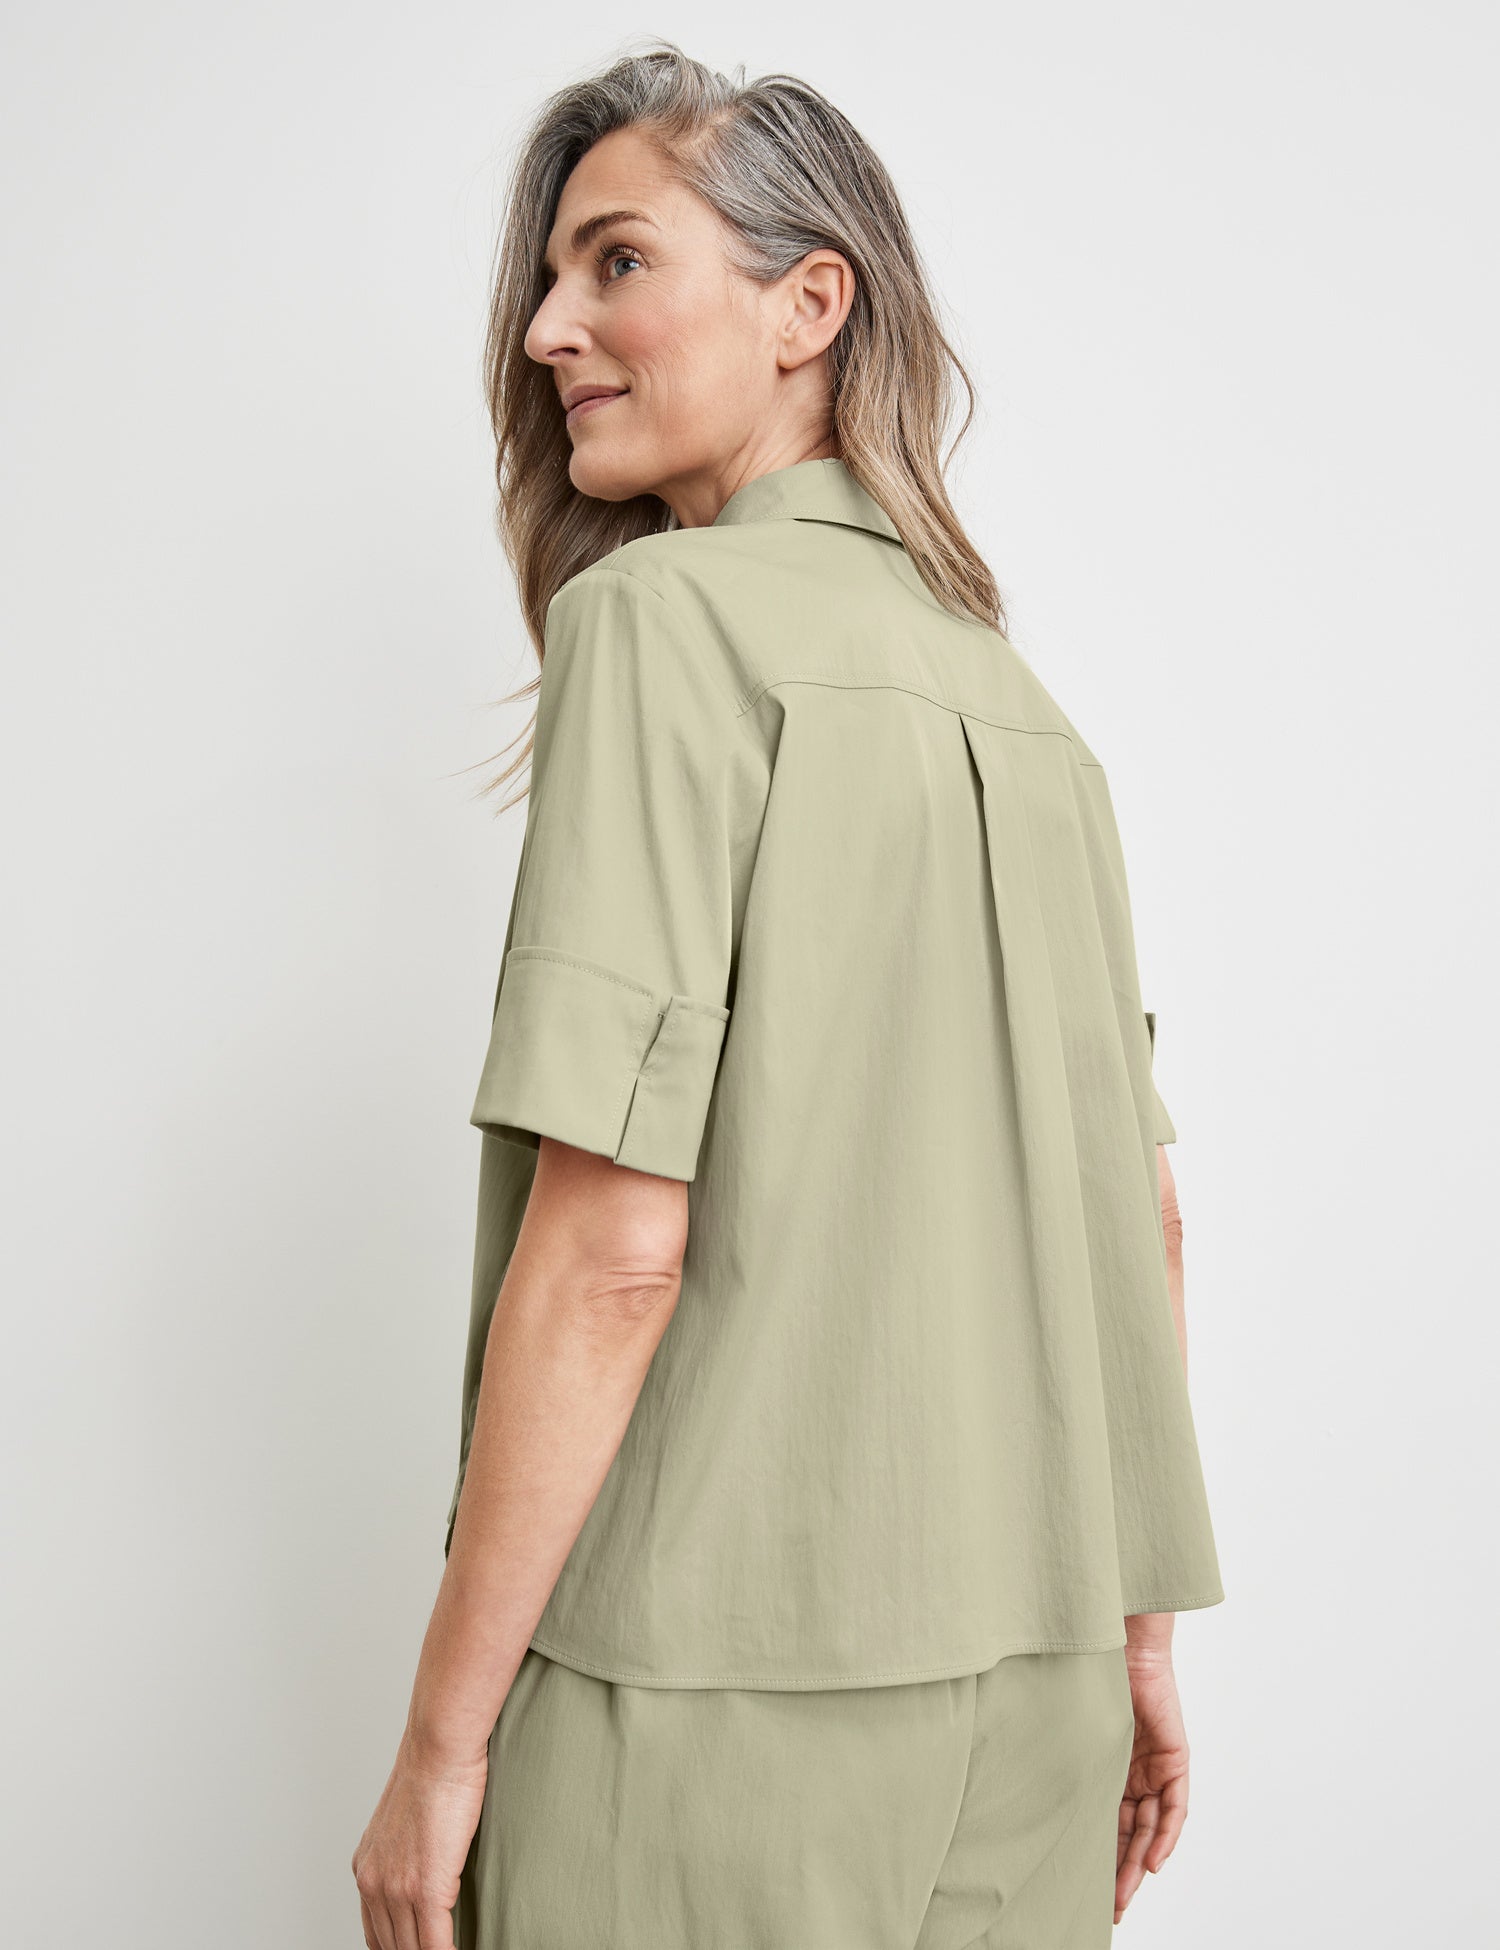 Blouse With Mid-Length Sleeves With Turn-Ups